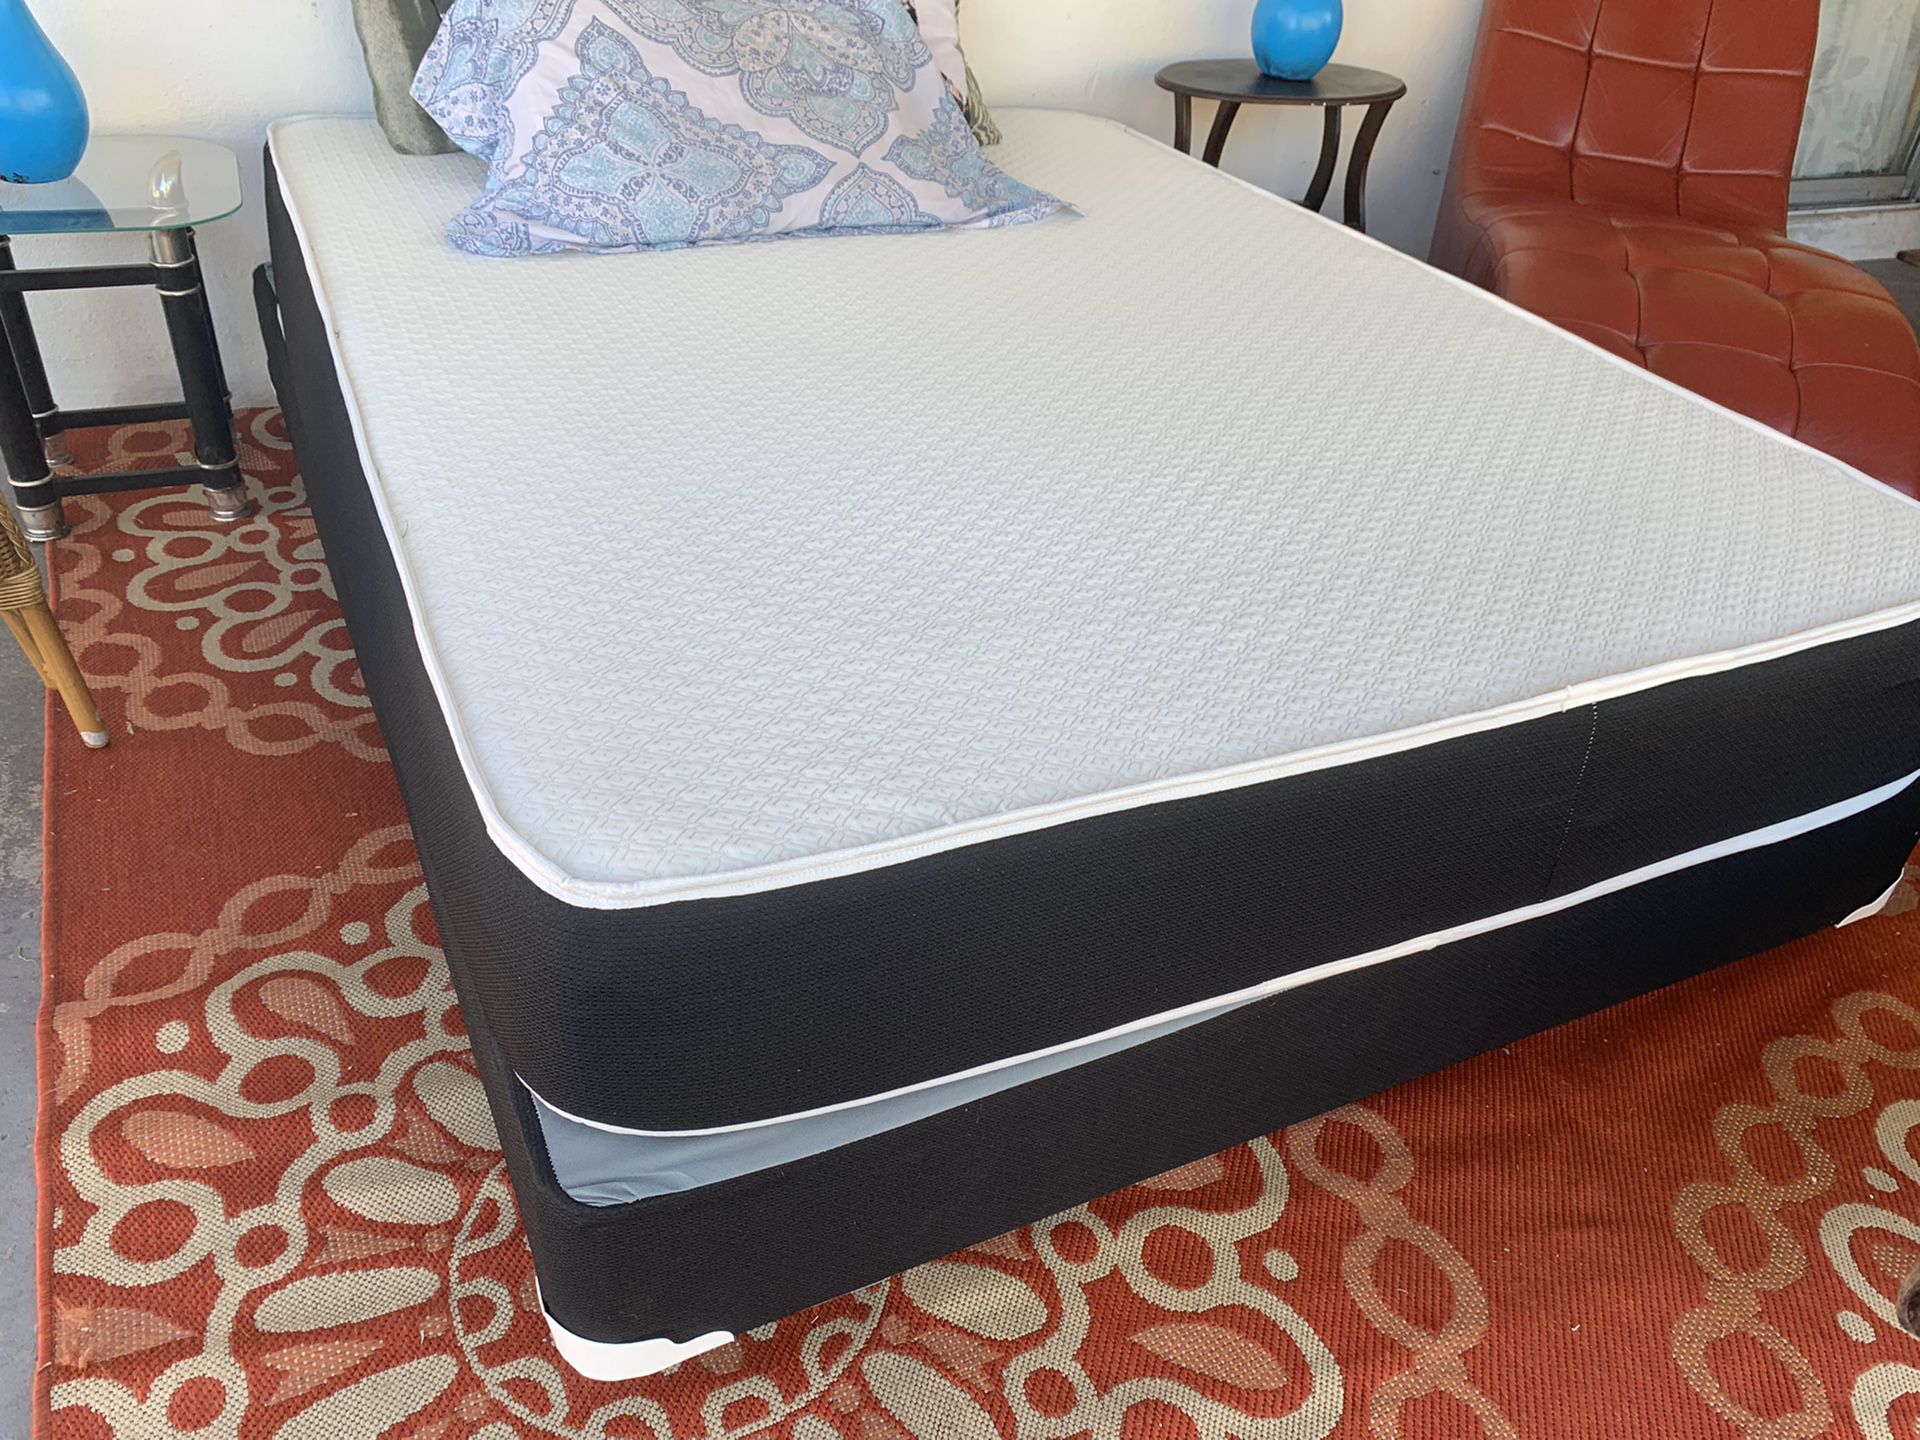 NEW FULL SIDE MATTRESS WITH BOX SPRIBG ALL NEW /BED FRAMES IS NOT INCLUDED